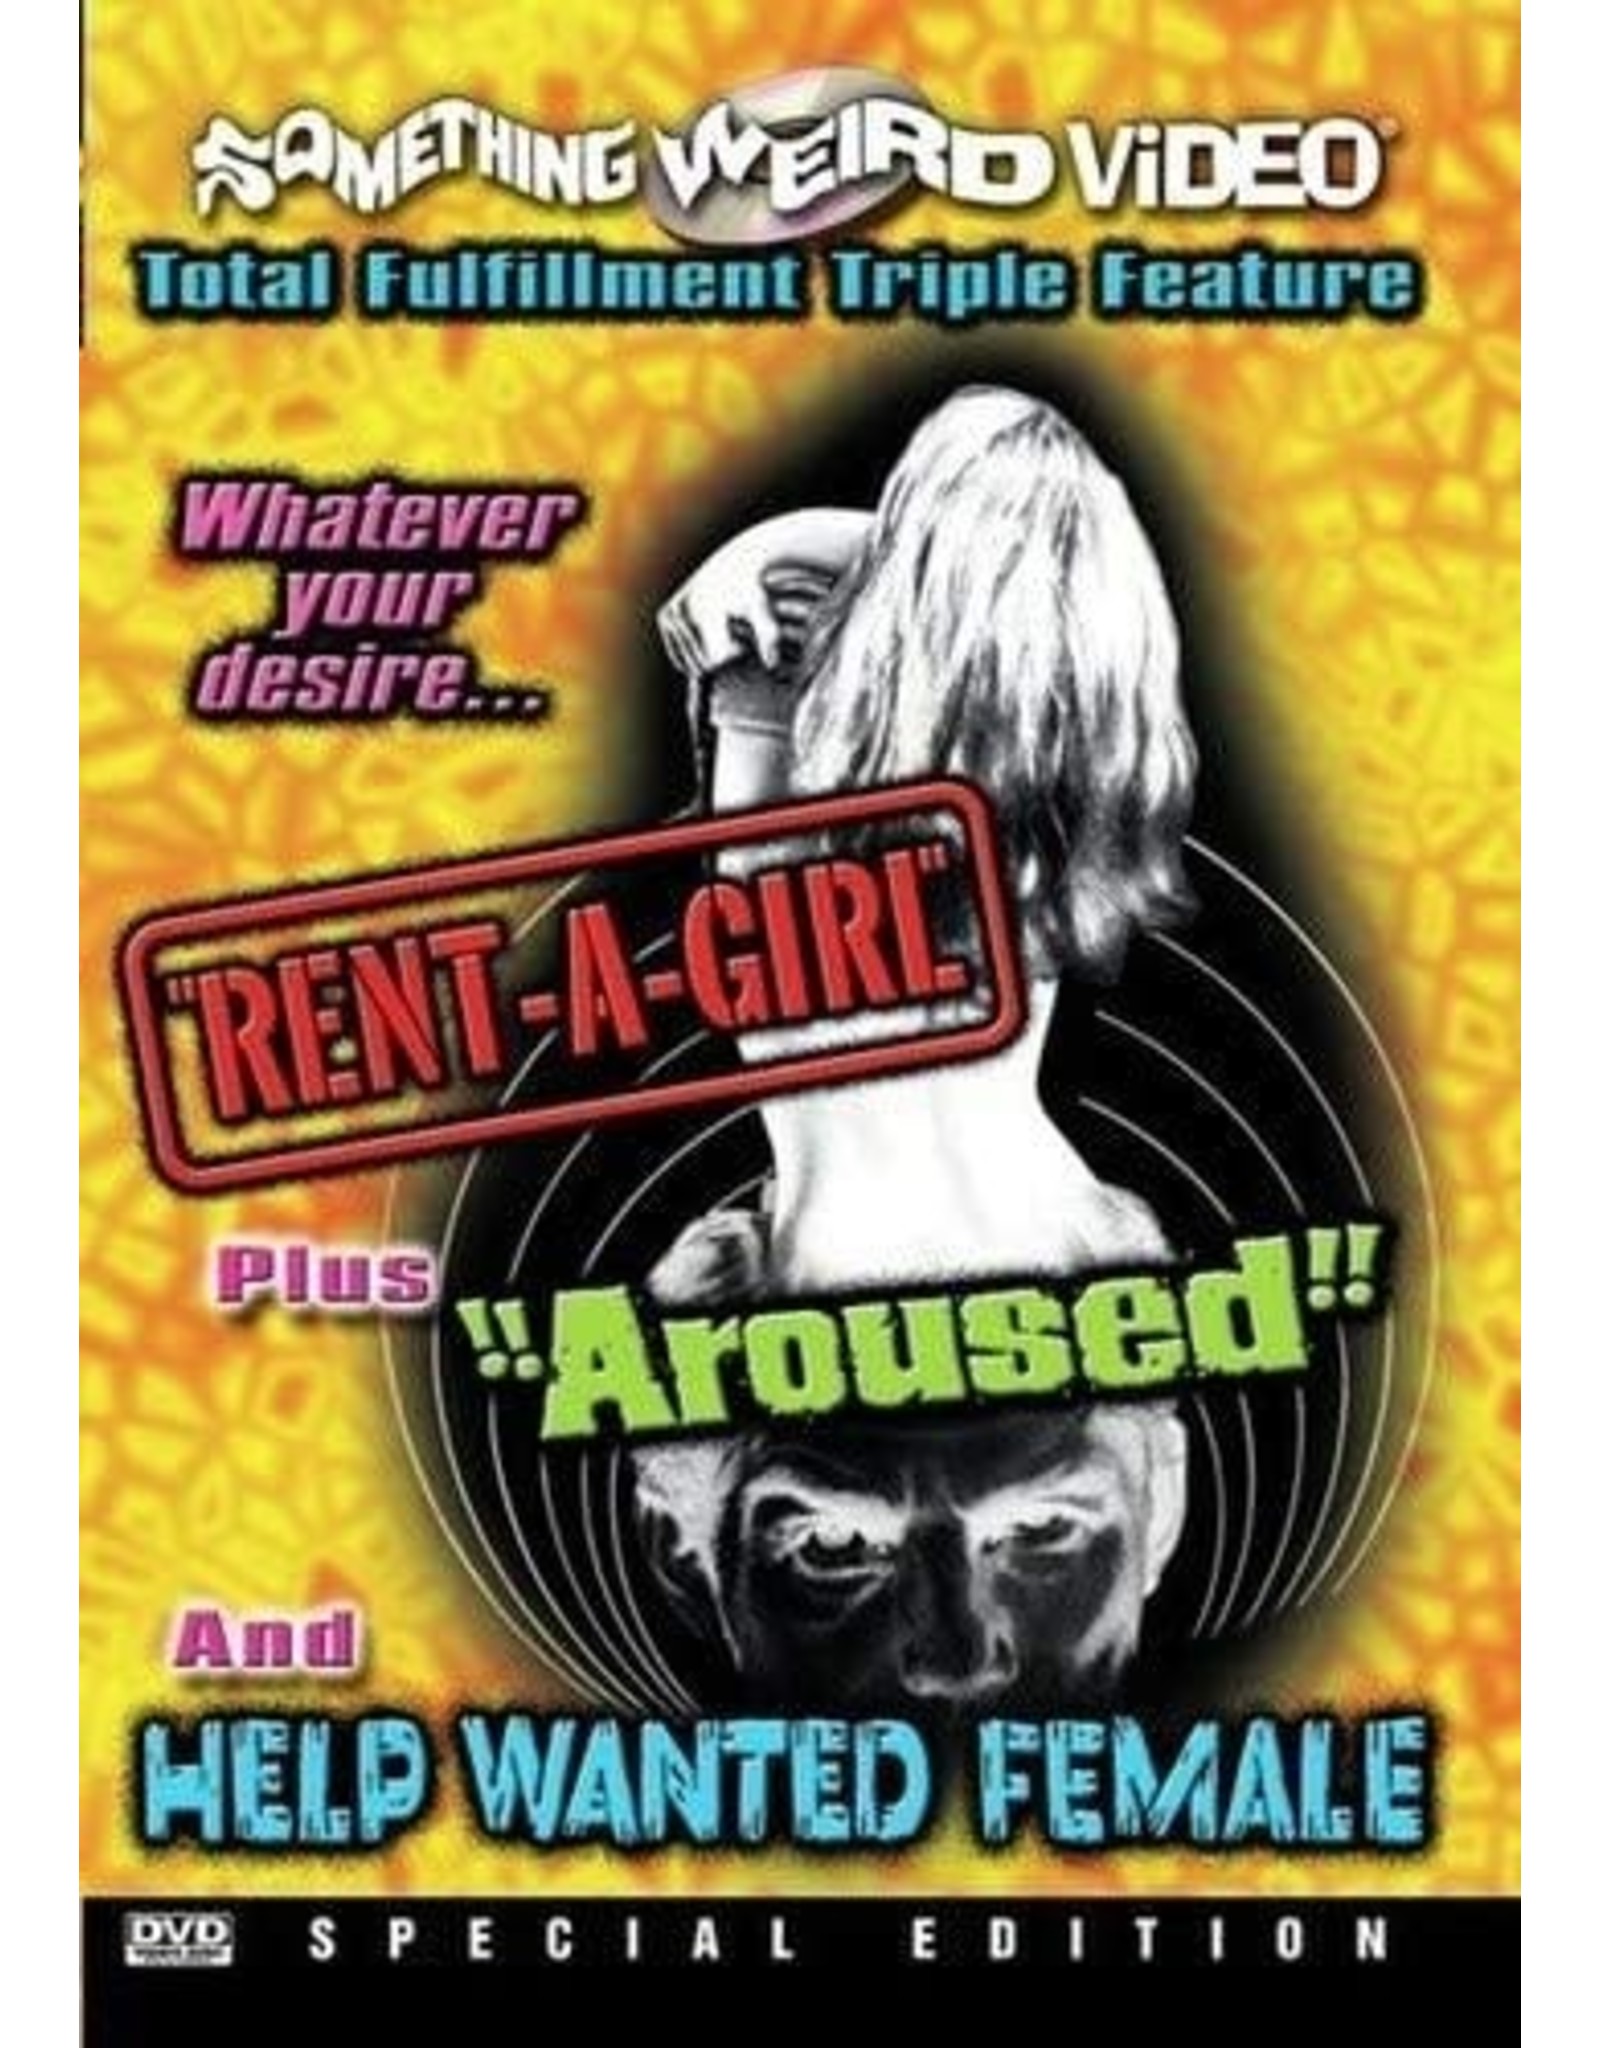 Cult & Cool Rent-A-Girl / Aroused / Help Wanted Female Triple Feature - Something Weird Video (Used)